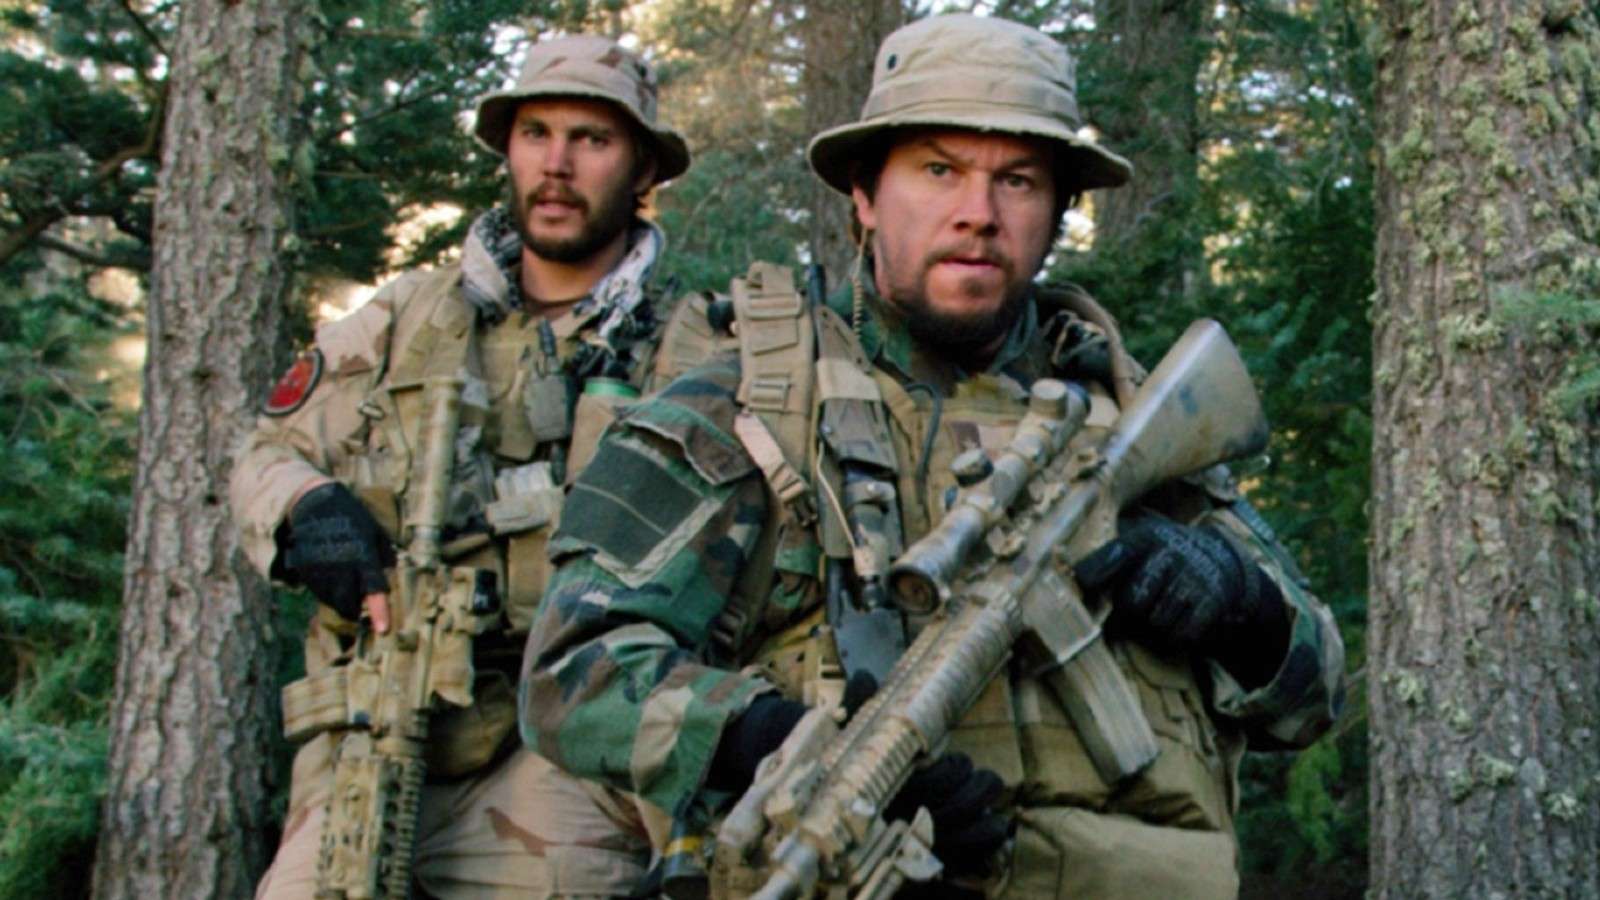 Taylor Kitsch and Mark Wahlberg carrying guns into war during Lone Survivor.